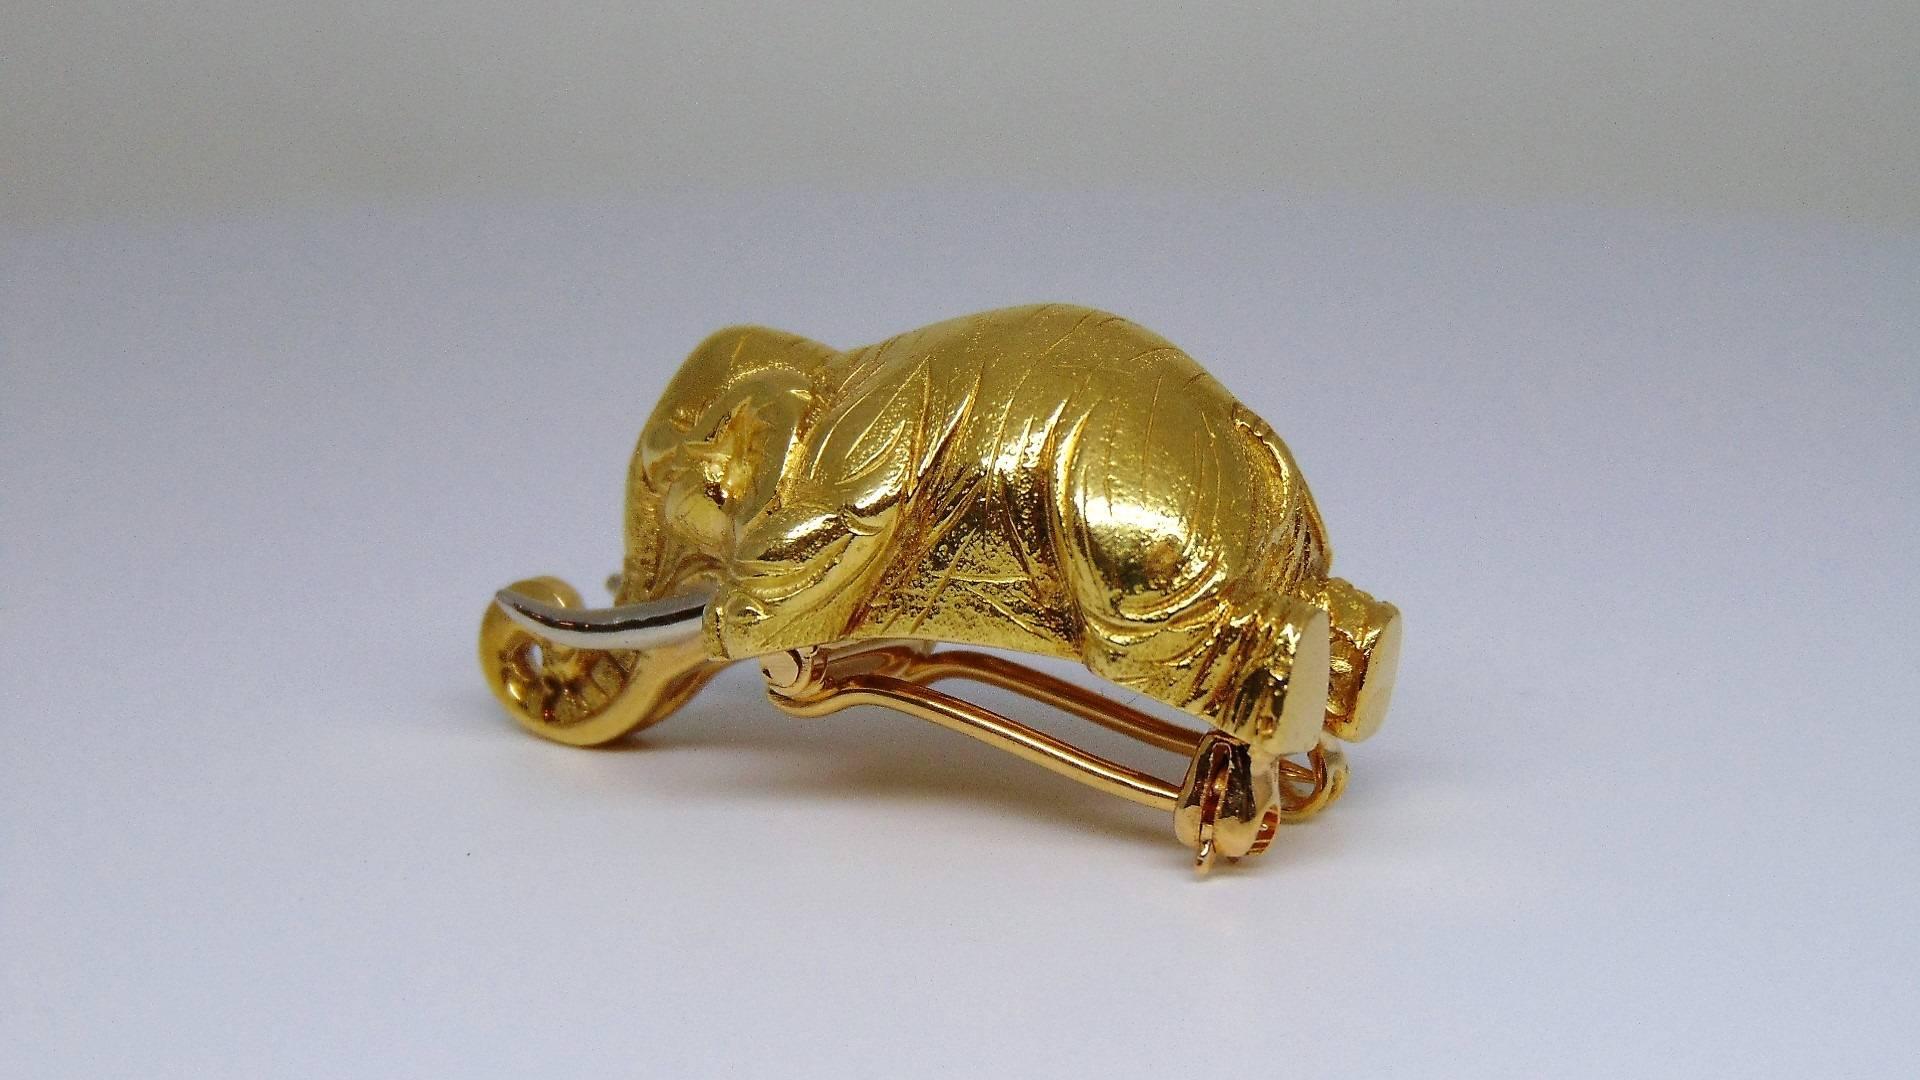 Super RARE brooch! The client's grandparents commissioned Tiffany & Co in NYC to make this Elephant brooch because they were Republicans and fans of President Eisenhower! No matter your politcal stance, it's a cool story and a totally unique piece.